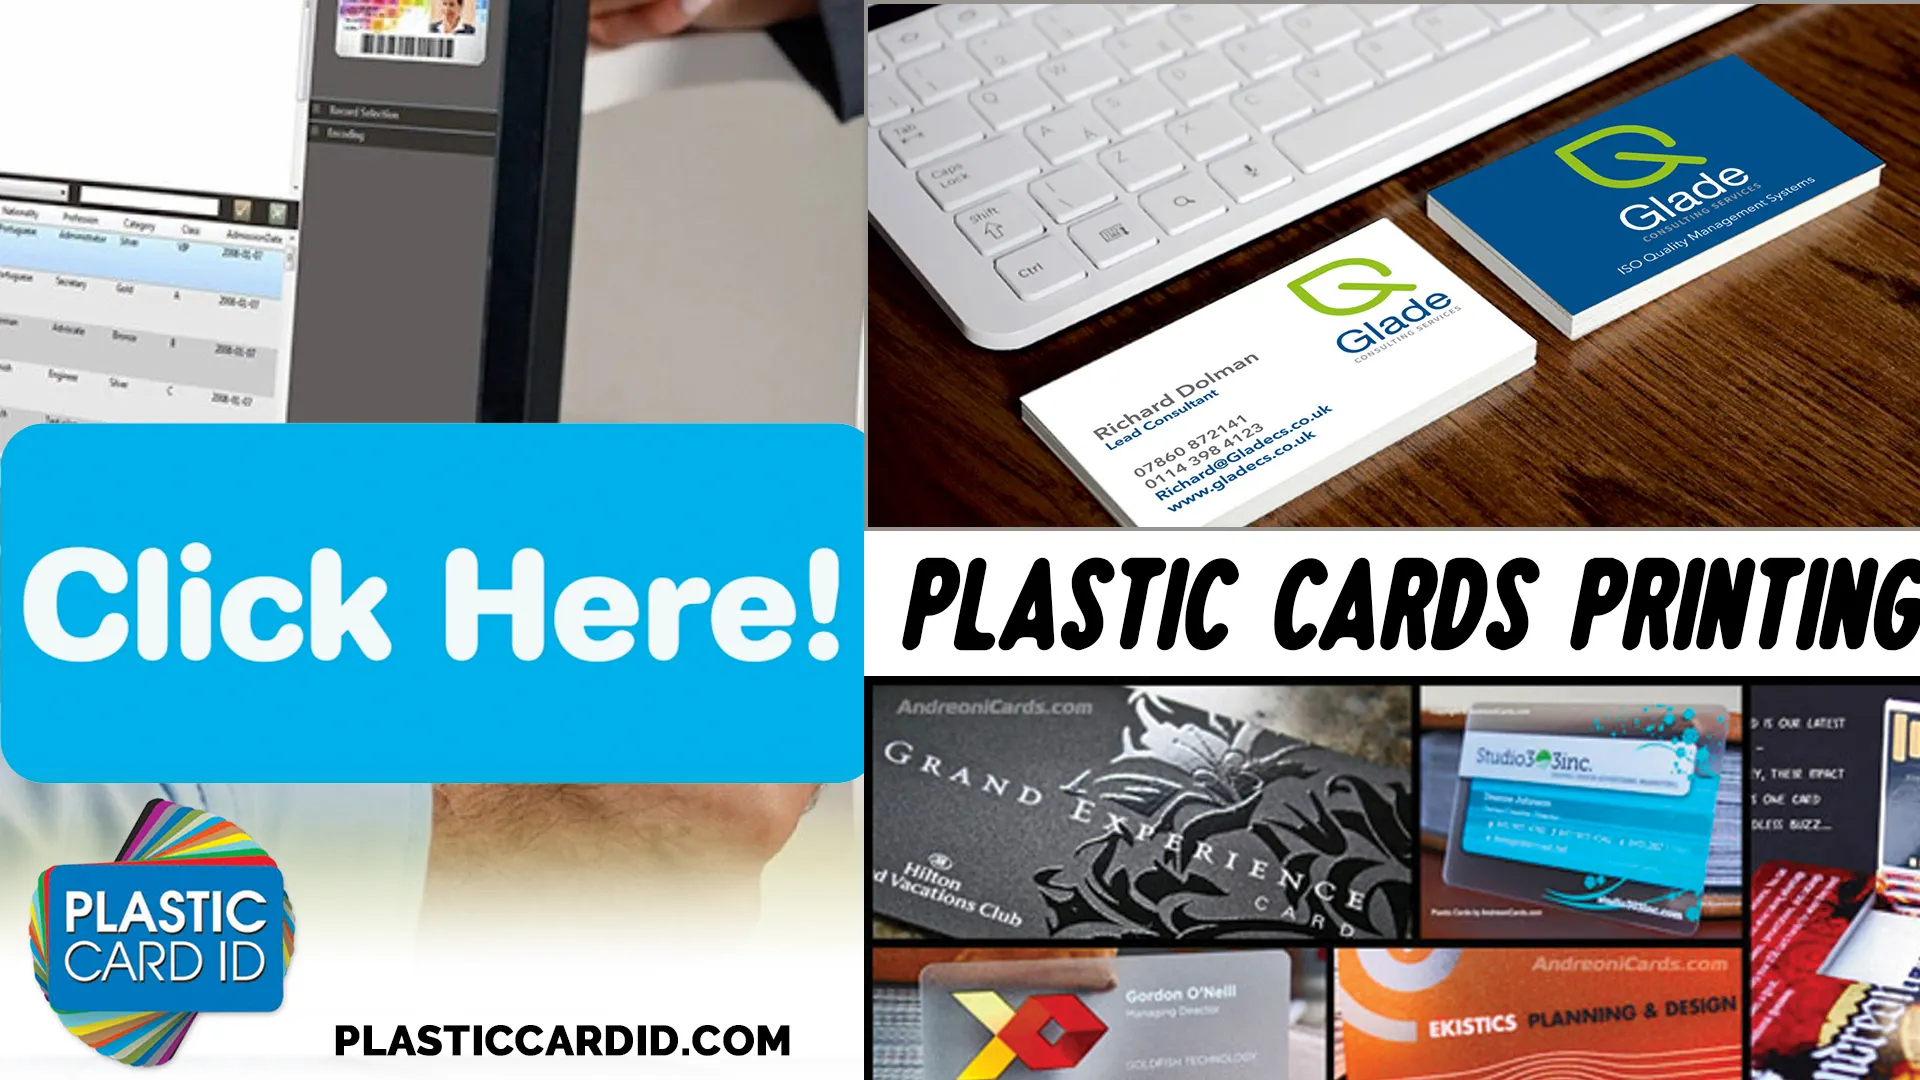 Welcome to Plastic Card ID




, Your Trusted Partner in Card Continuity and Satisfaction